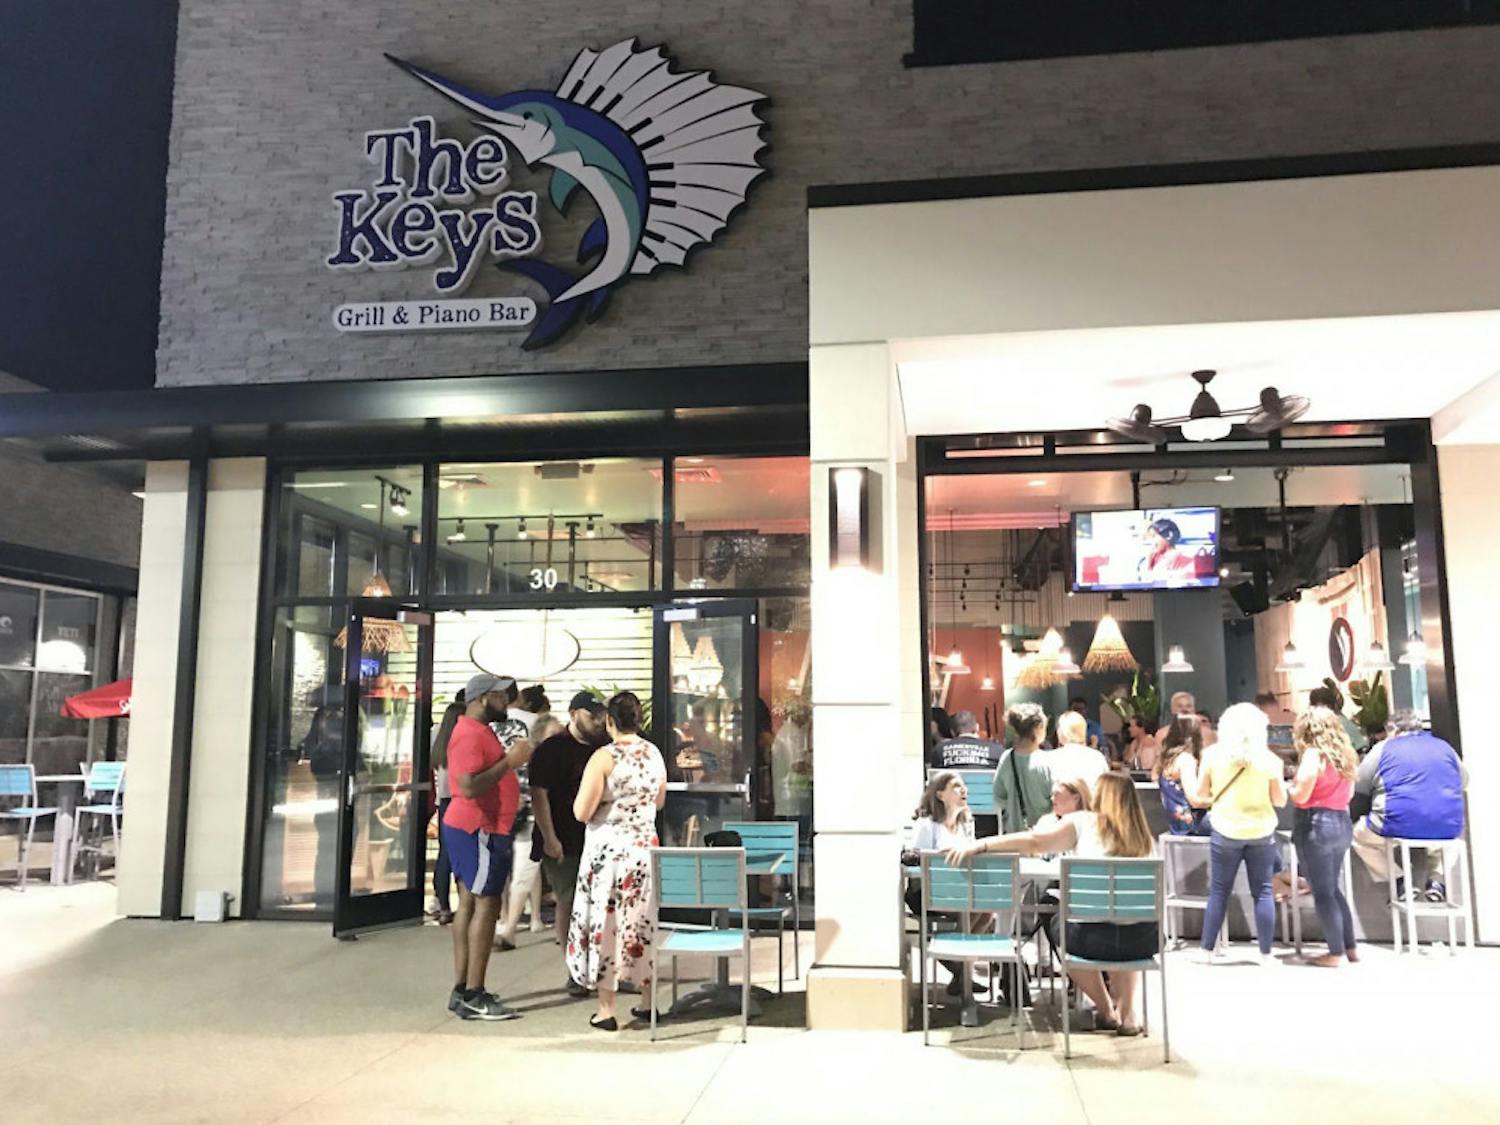 The Keys, a new seafood restaurant and entertainment venue, held its grand opening at Celebration Pointe&nbsp;on Wednesday&nbsp;evening. Originally scheduled to open on Sept. 2, the date was pushed back due to Hurricane Dorian.&nbsp;